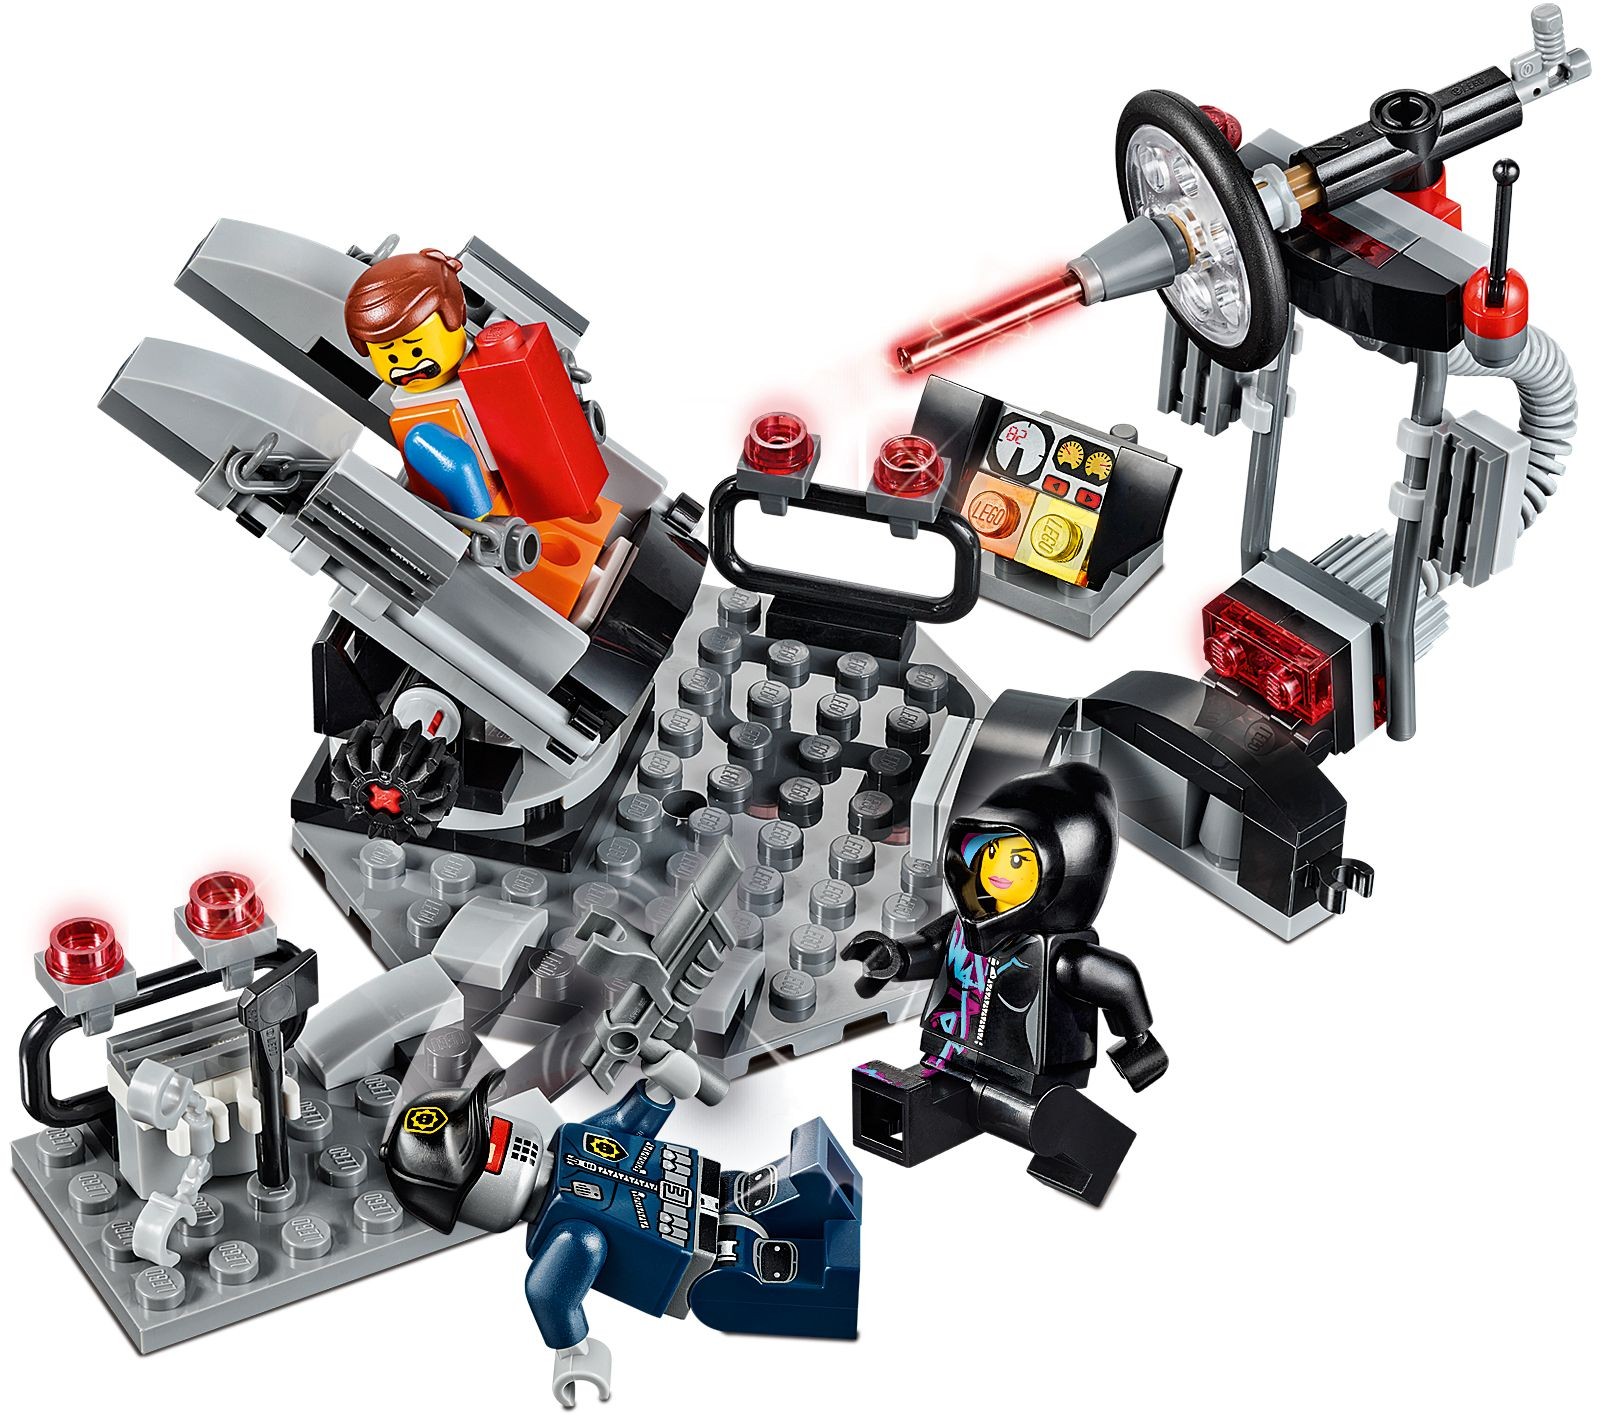 Film and Movie-Themed LEGO® Toy Sets